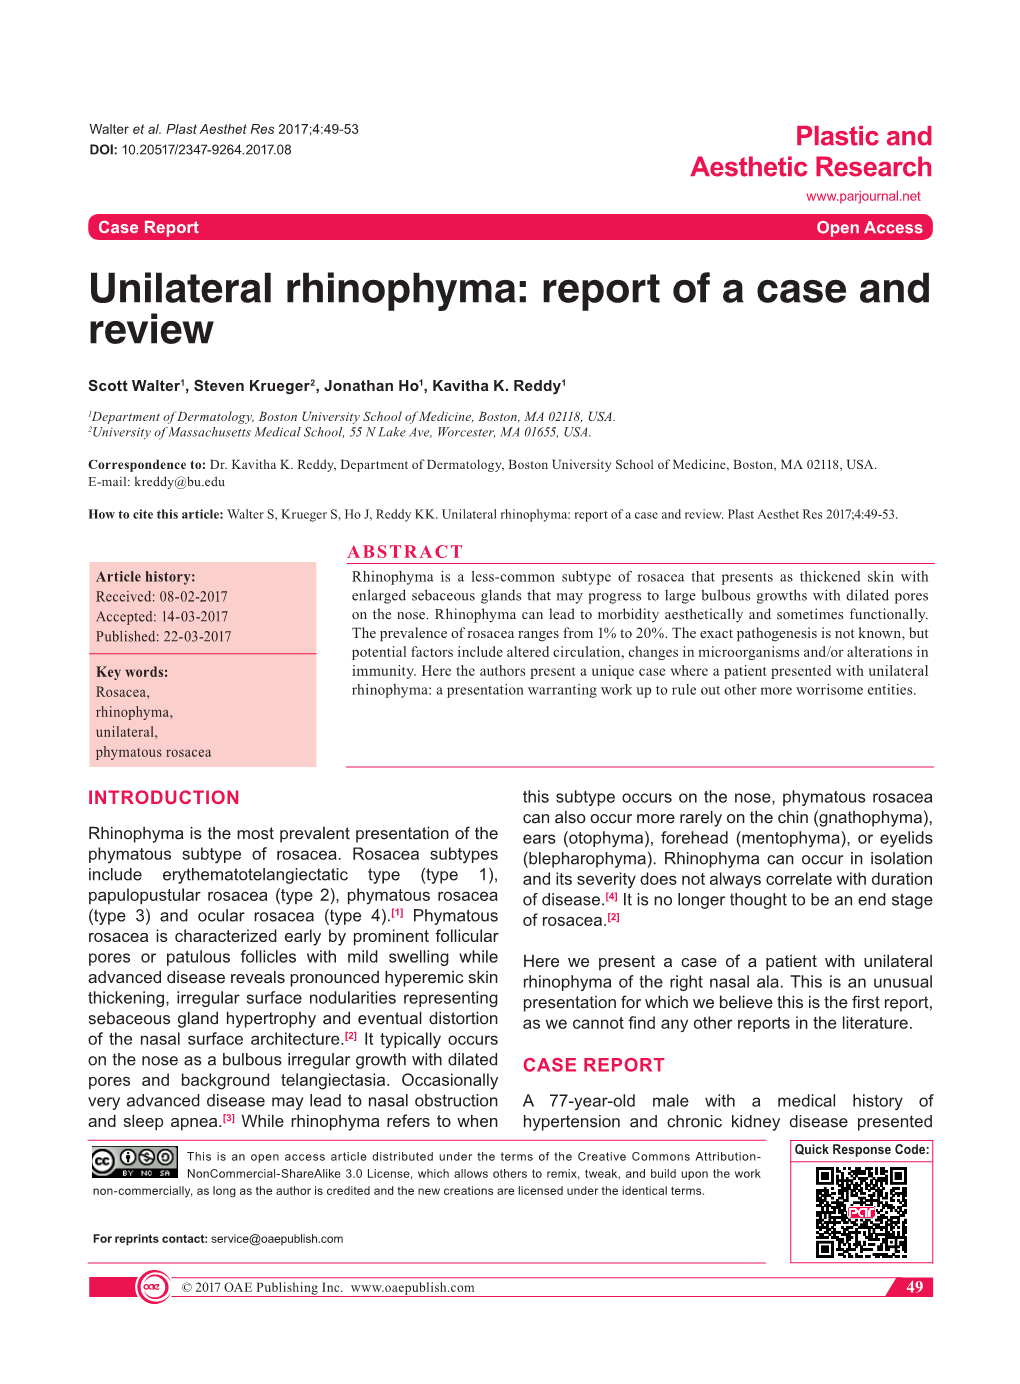 Unilateral Rhinophyma: Report of a Case and Review